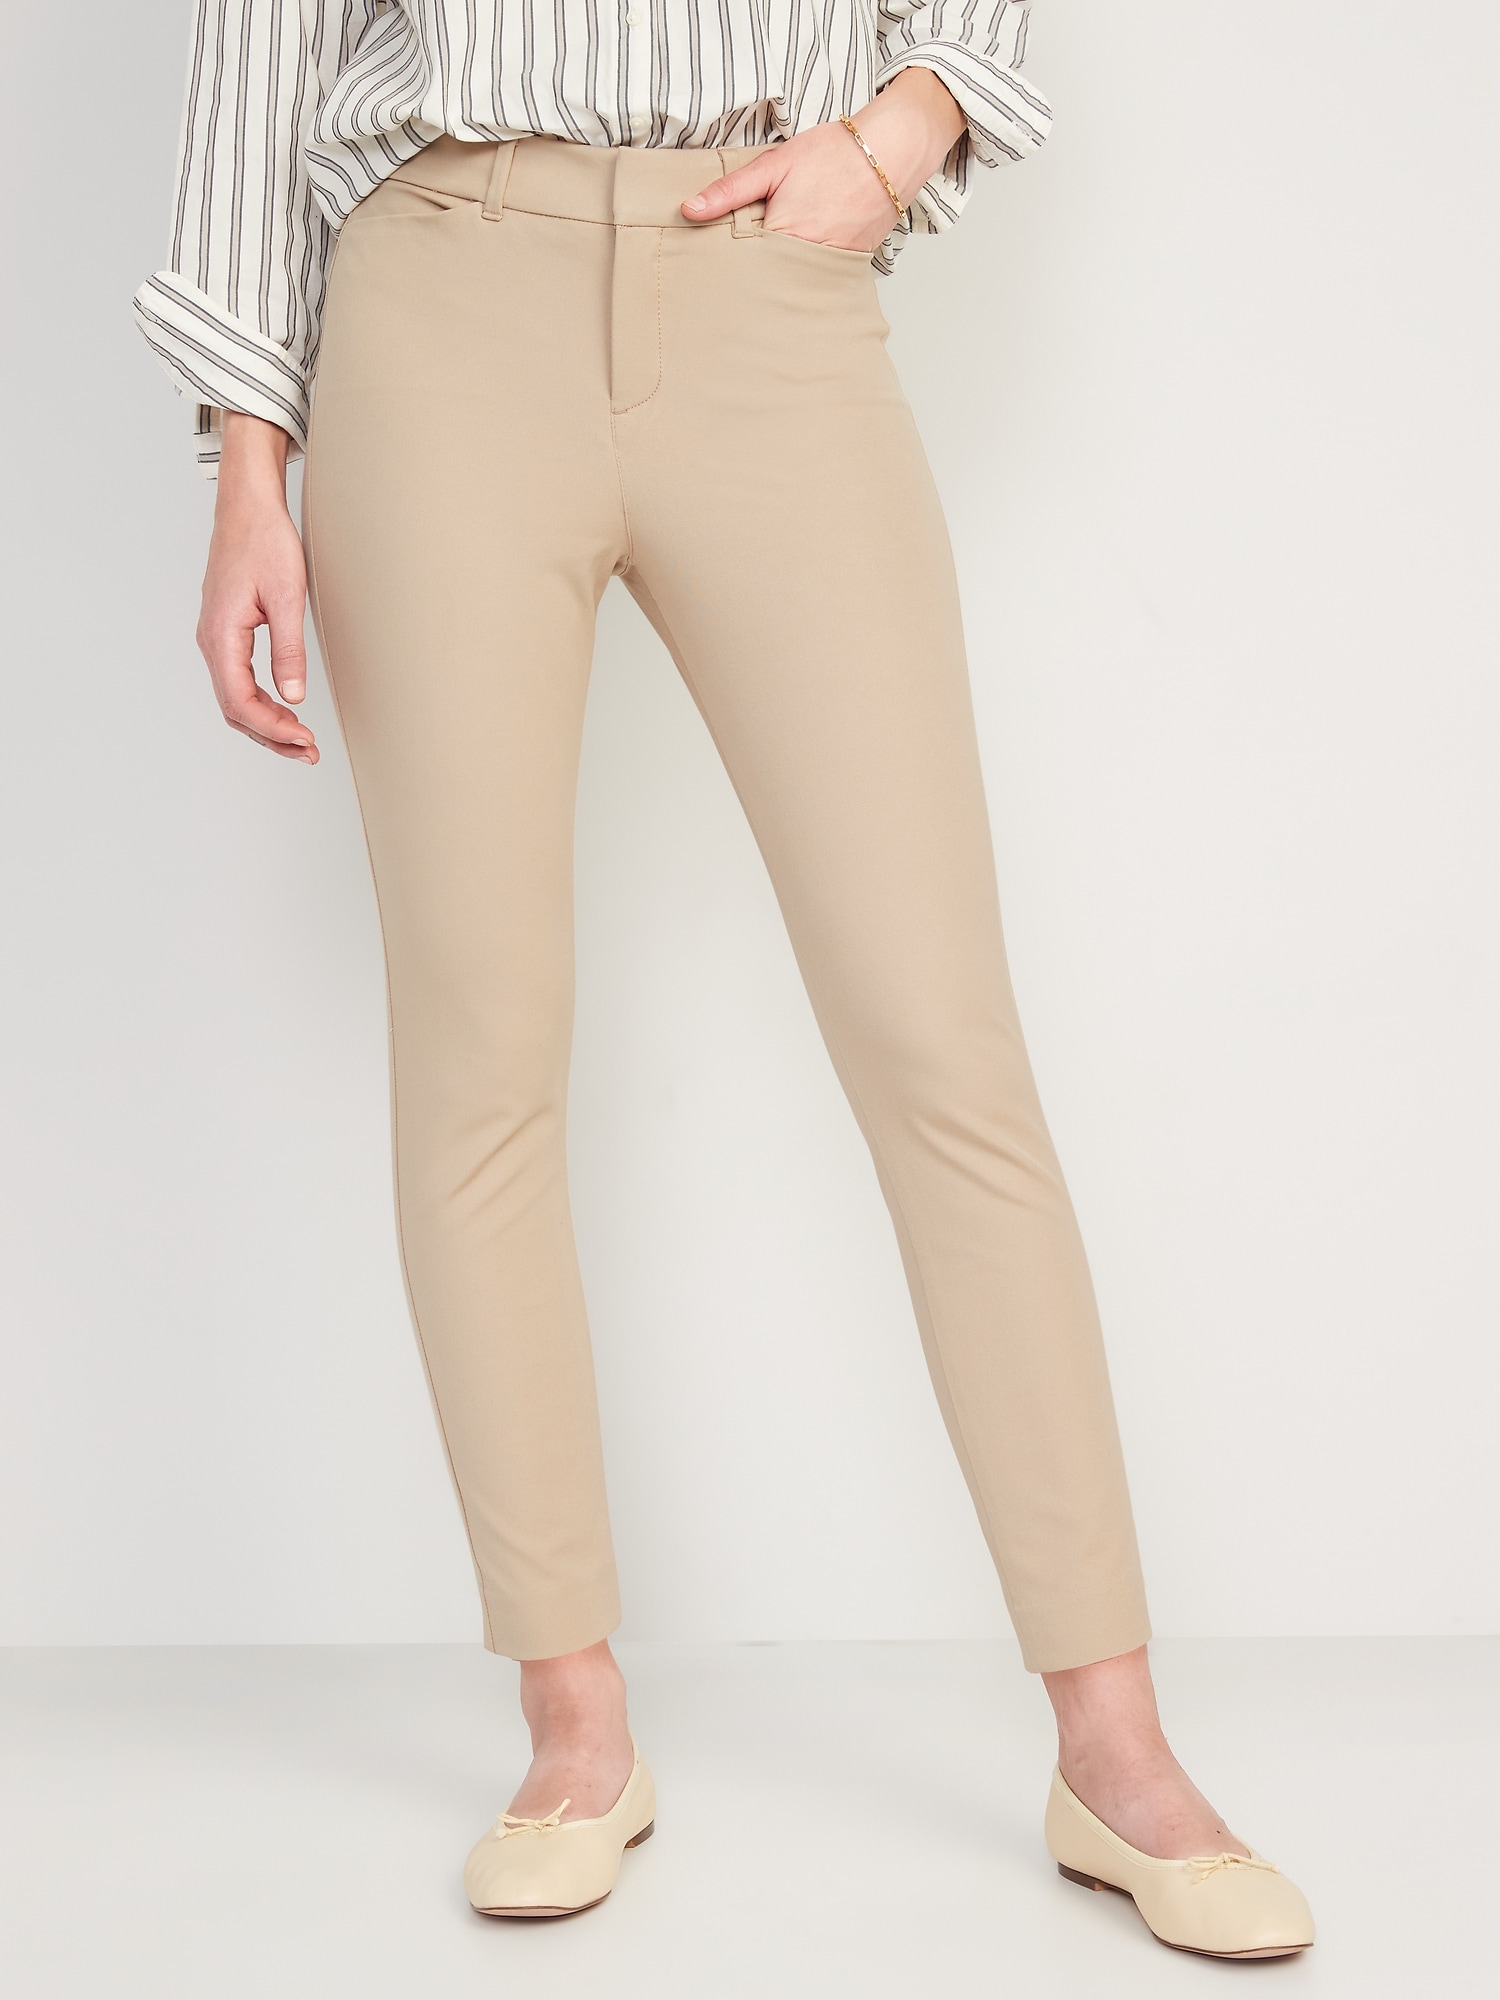 Express Columnist Ankle High Rise Pants Skinny Pull On Light Brown